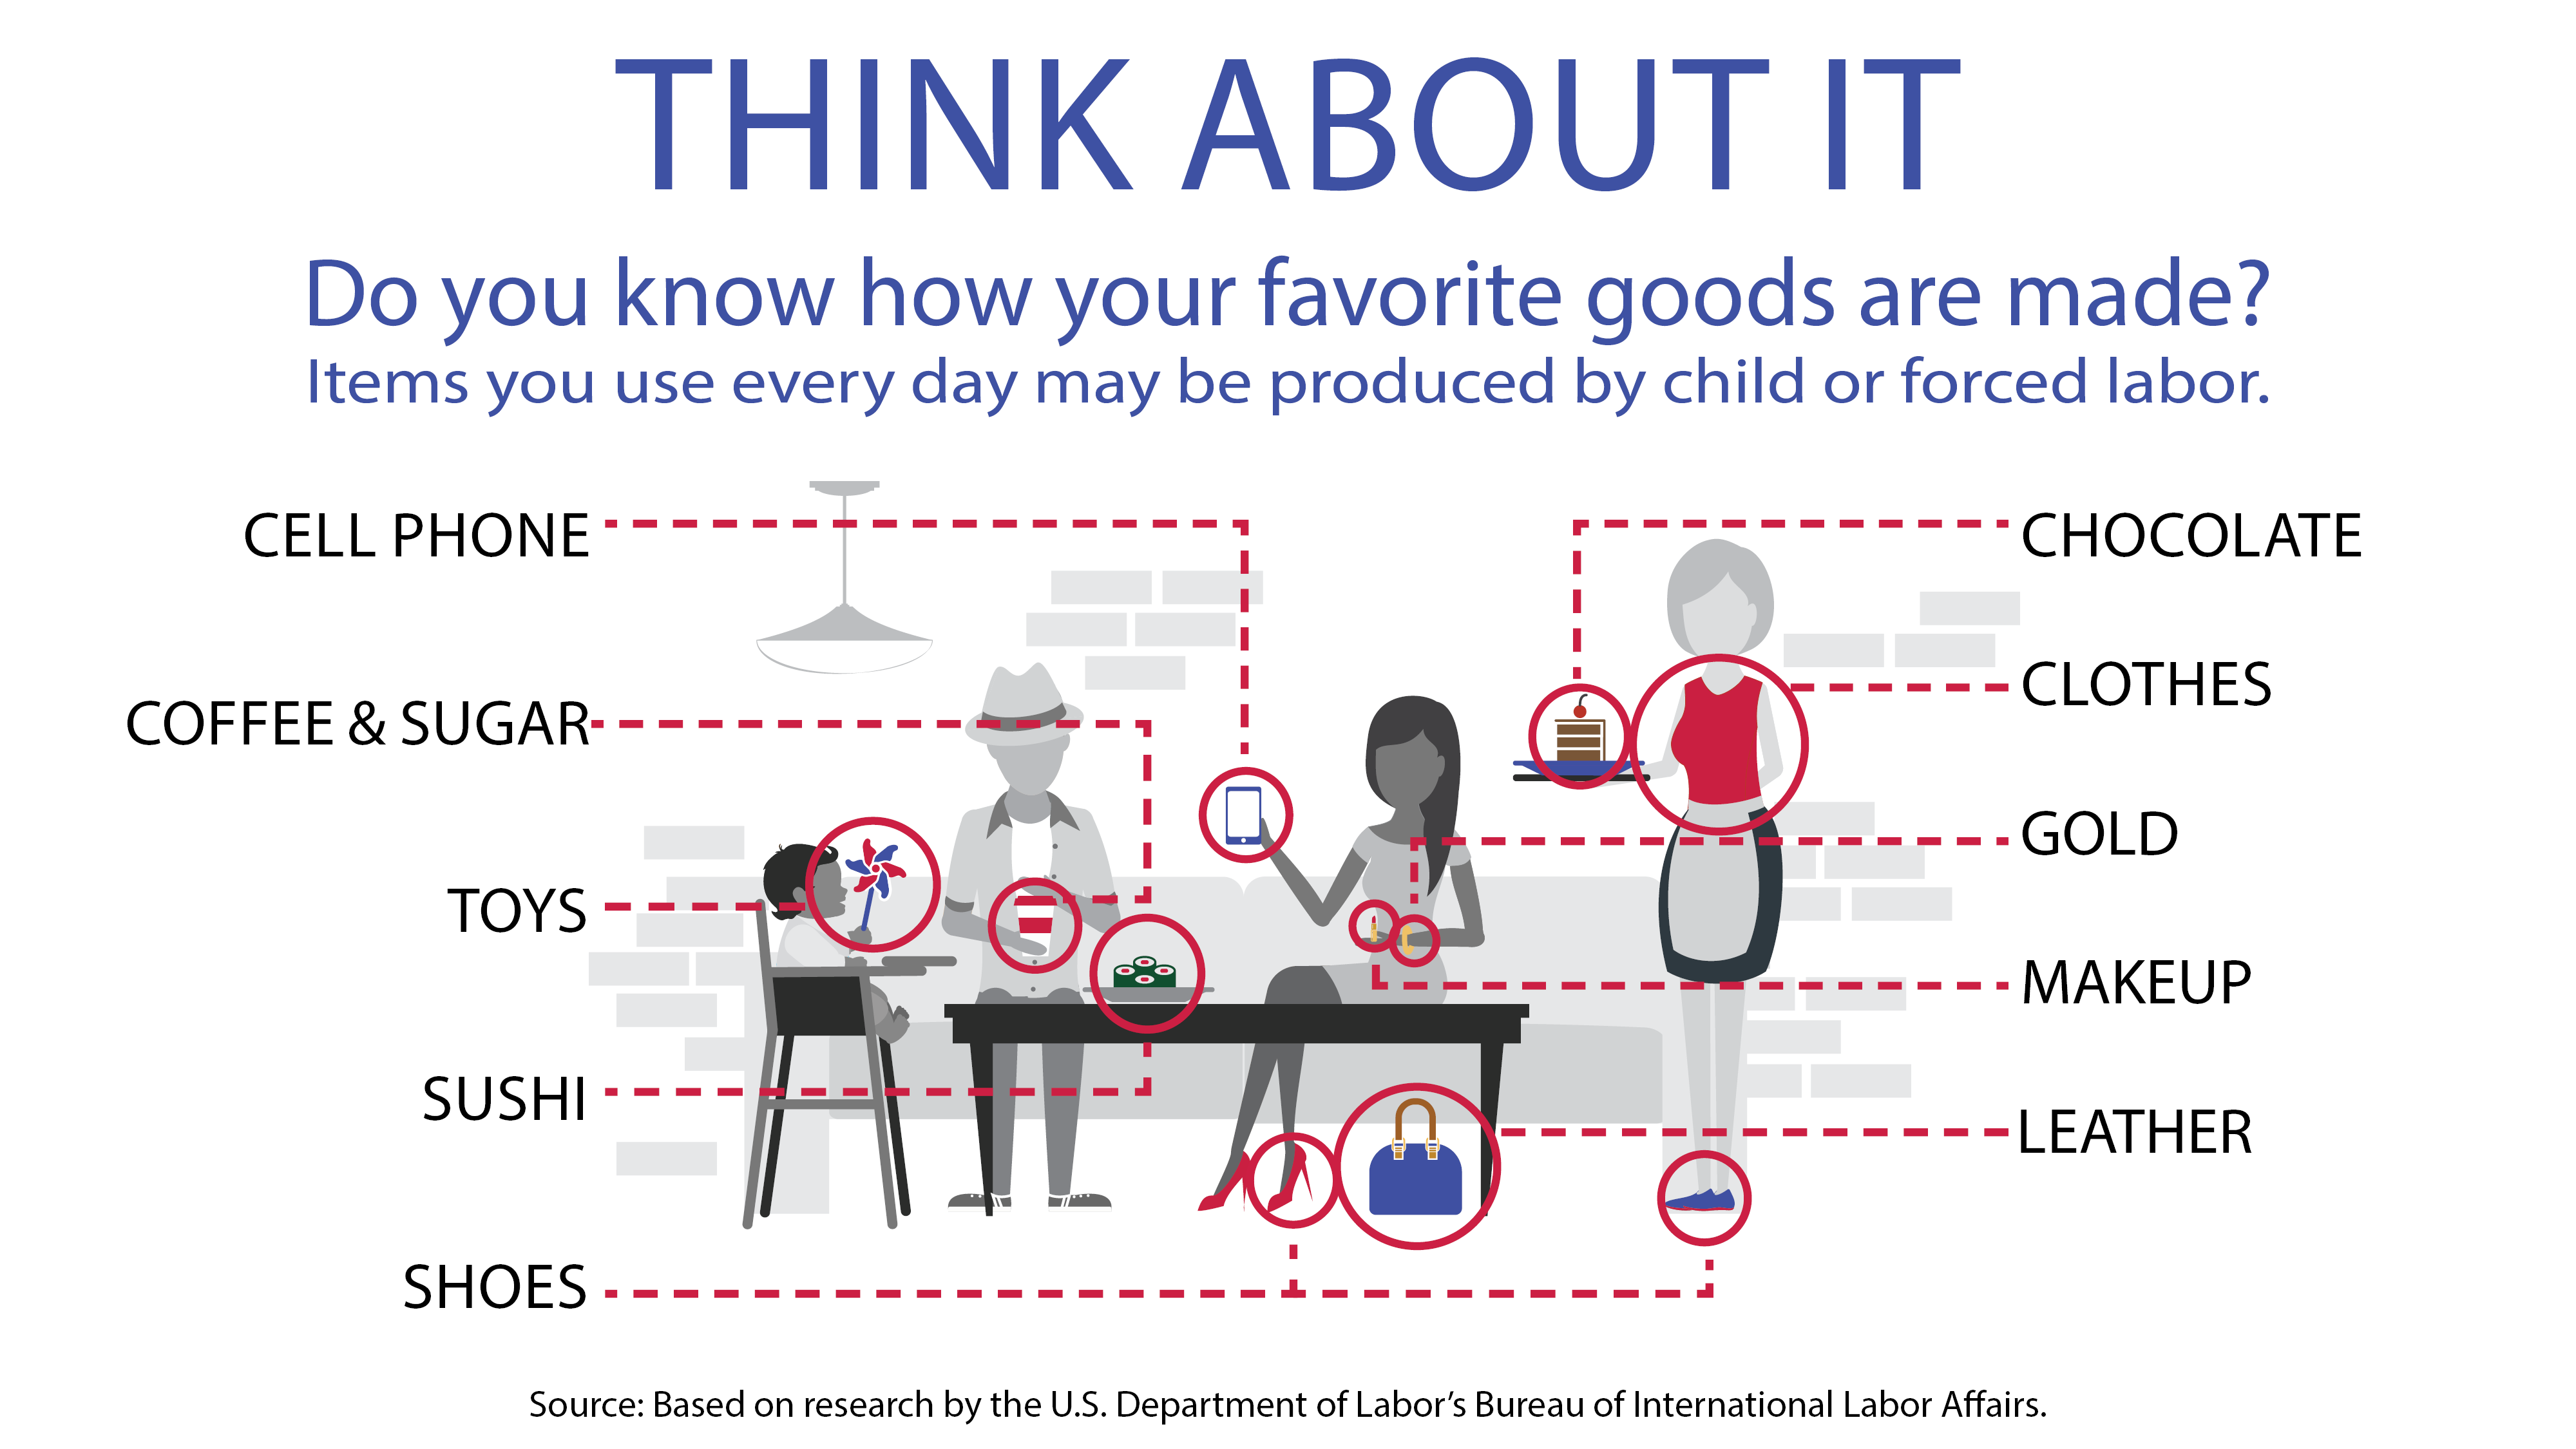 Do you know how your favorite goods are made? Learn more about items you use every day that may be produced by child or forced labor.